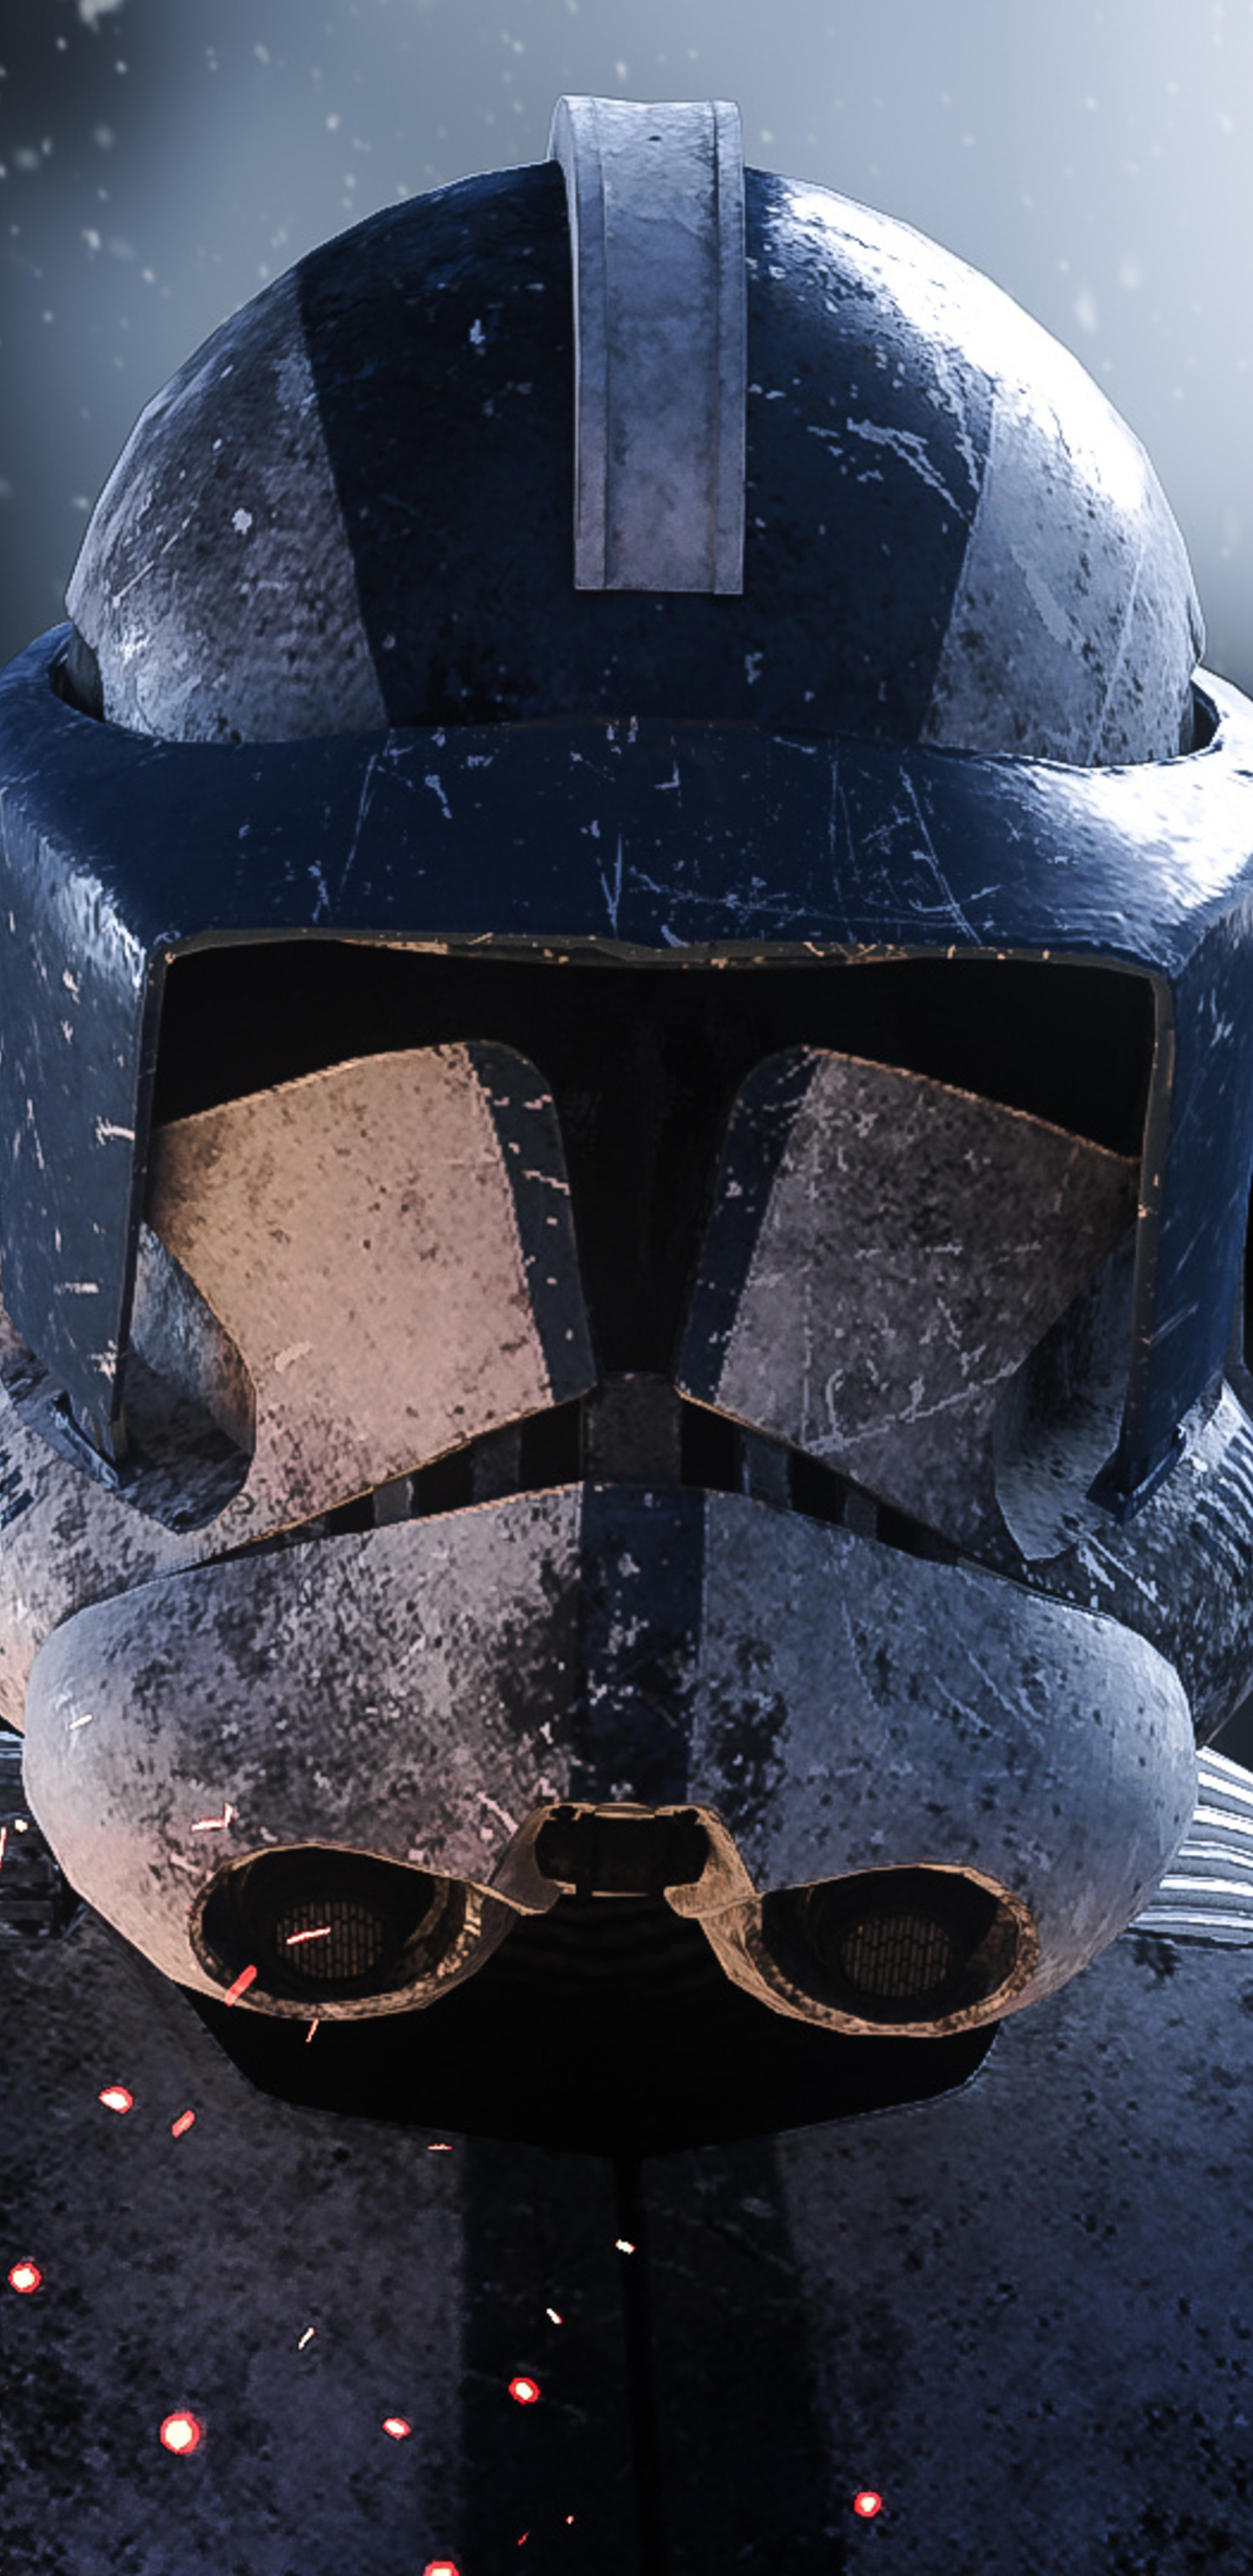 1440x2960 Clone Trooper Star Wars 2018 Samsung Galaxy Note 9,8, S9,S8,S8+  QHD HD 4k Wallpapers, Images, Backgrounds, Photos and Pictures